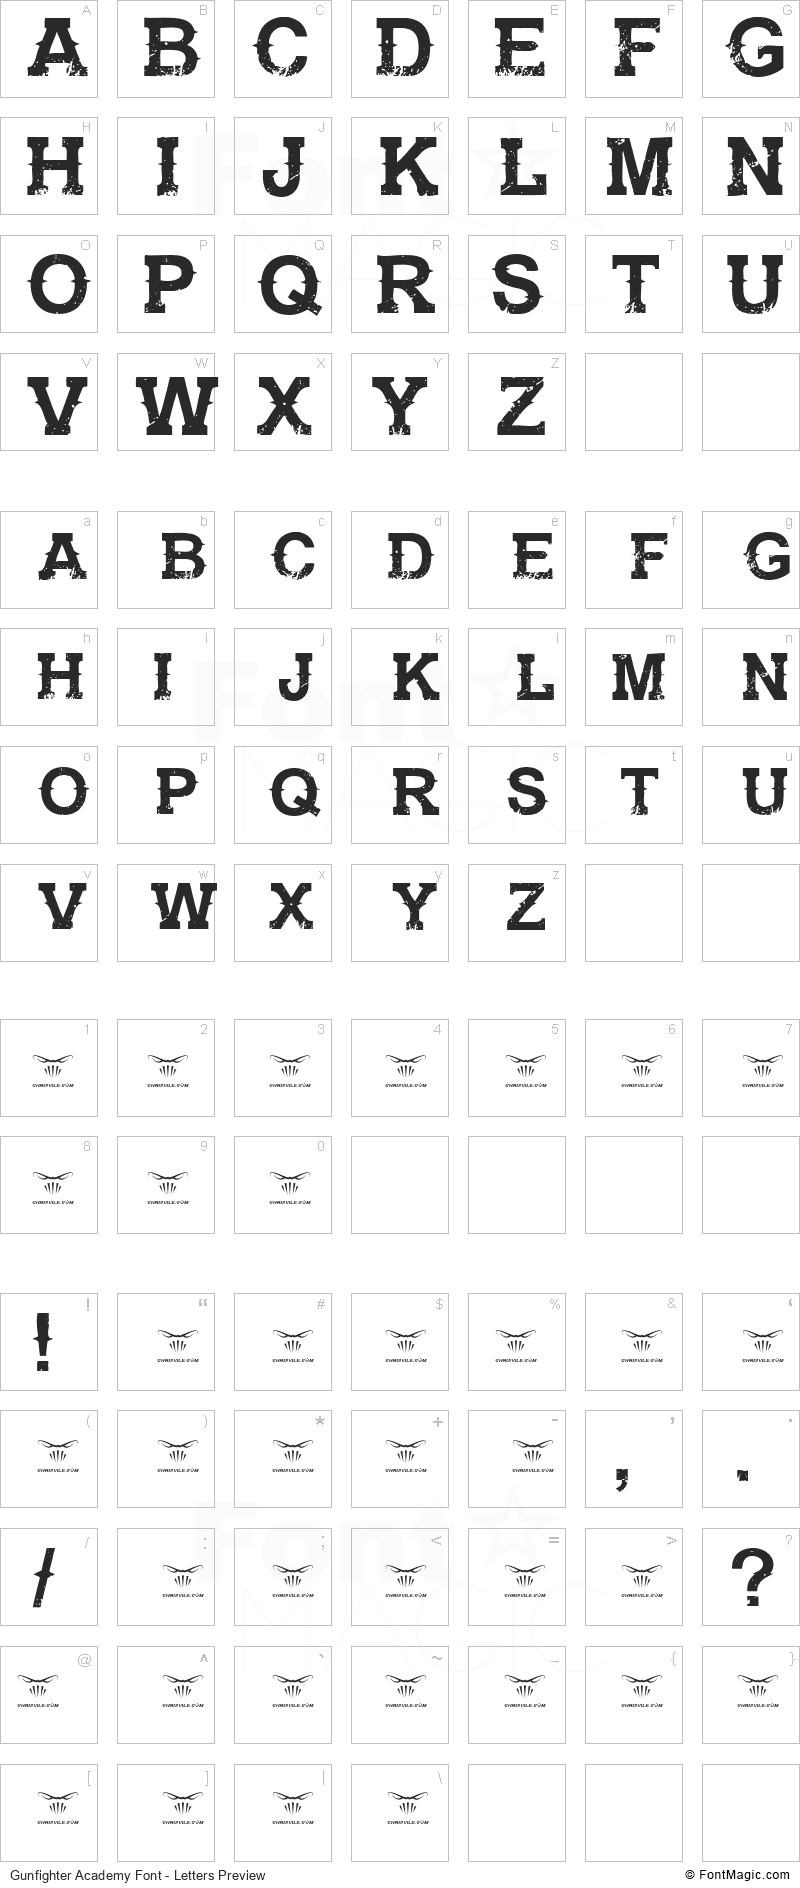 Gunfighter Academy Font - All Latters Preview Chart